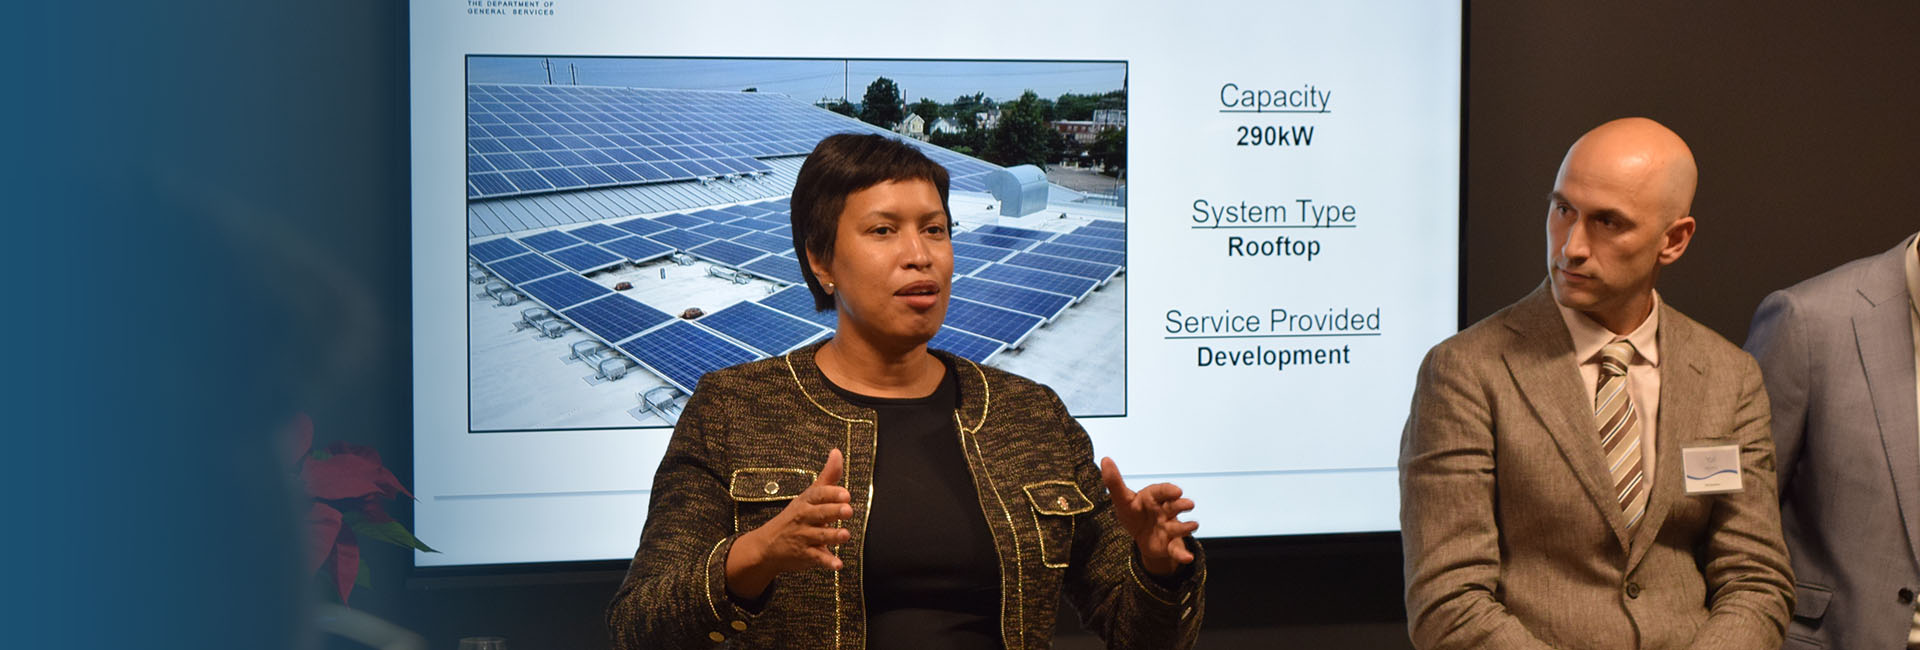 D.C. Sustainability: Sol Systems Co-Hosts a Special Evening with Mayor Muriel Bowser